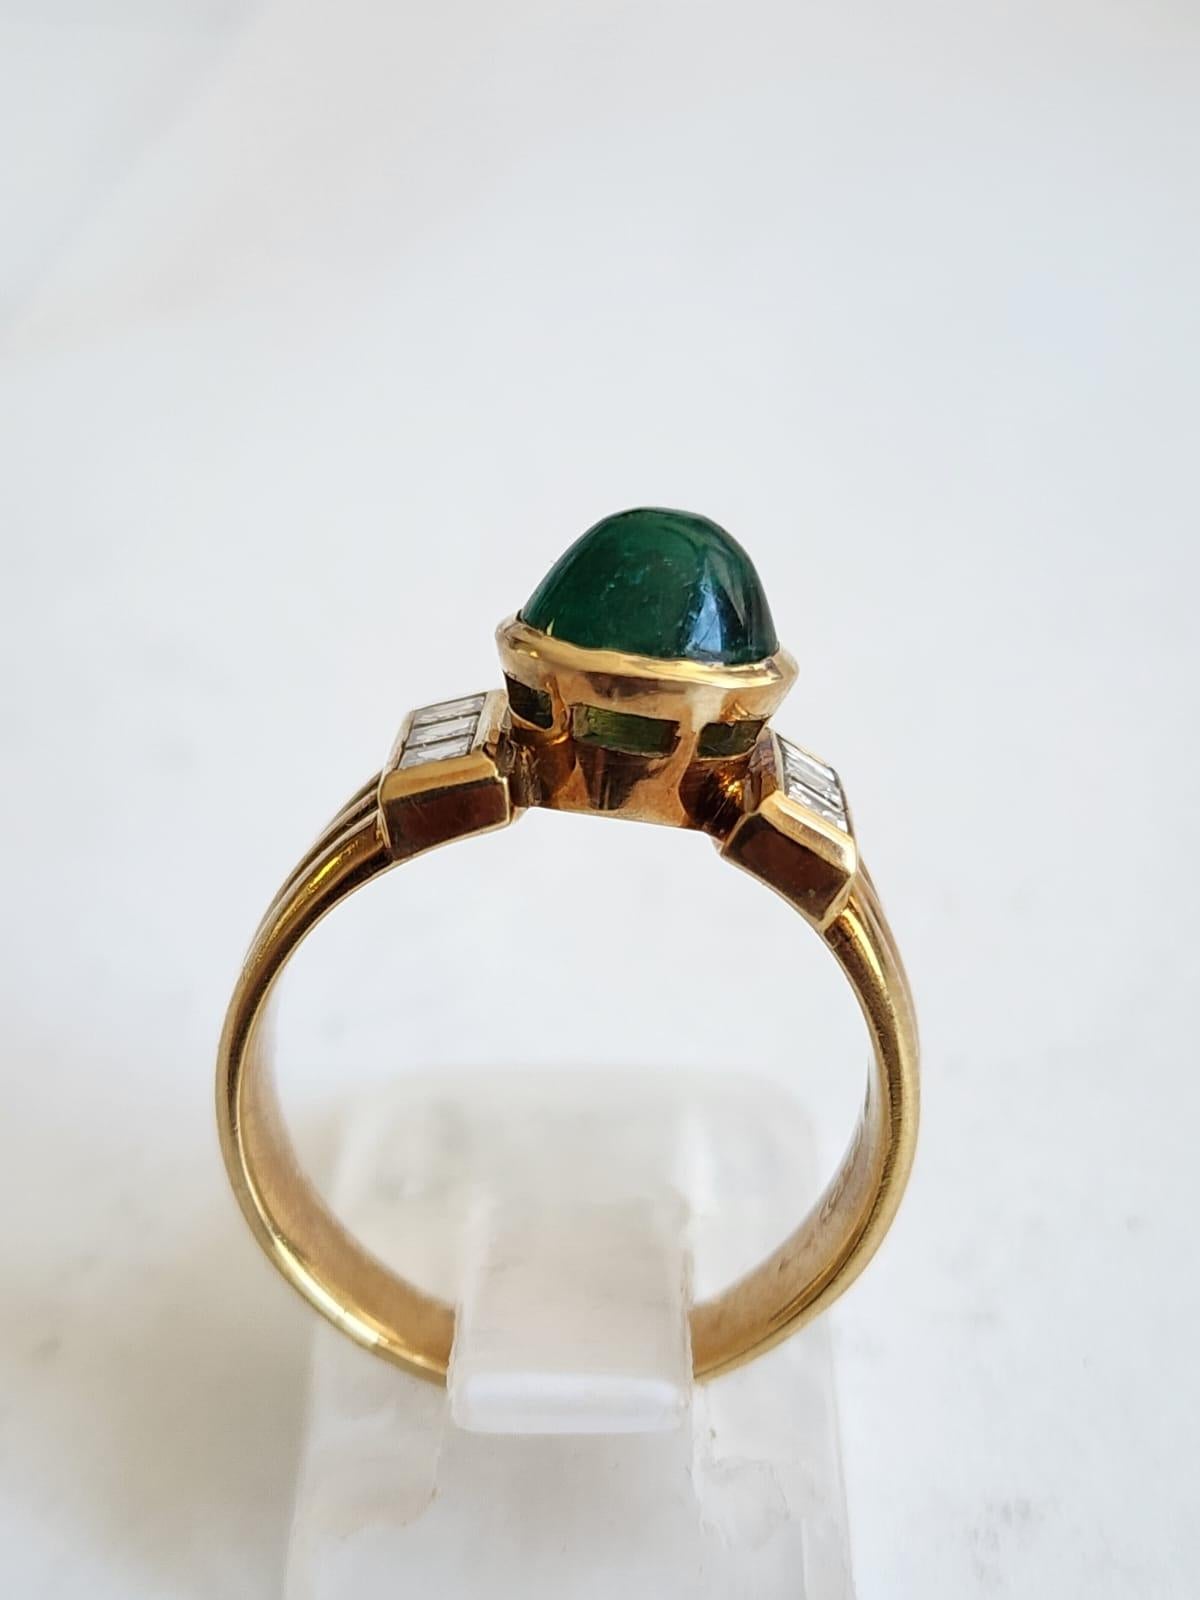 The yellow gold retro ring with central emerald cabochon stone surronde by 6 ascher cut diamonds
The weight of the emerald is 2.3 carat, the total weight of the diamonds is 0.60 carat